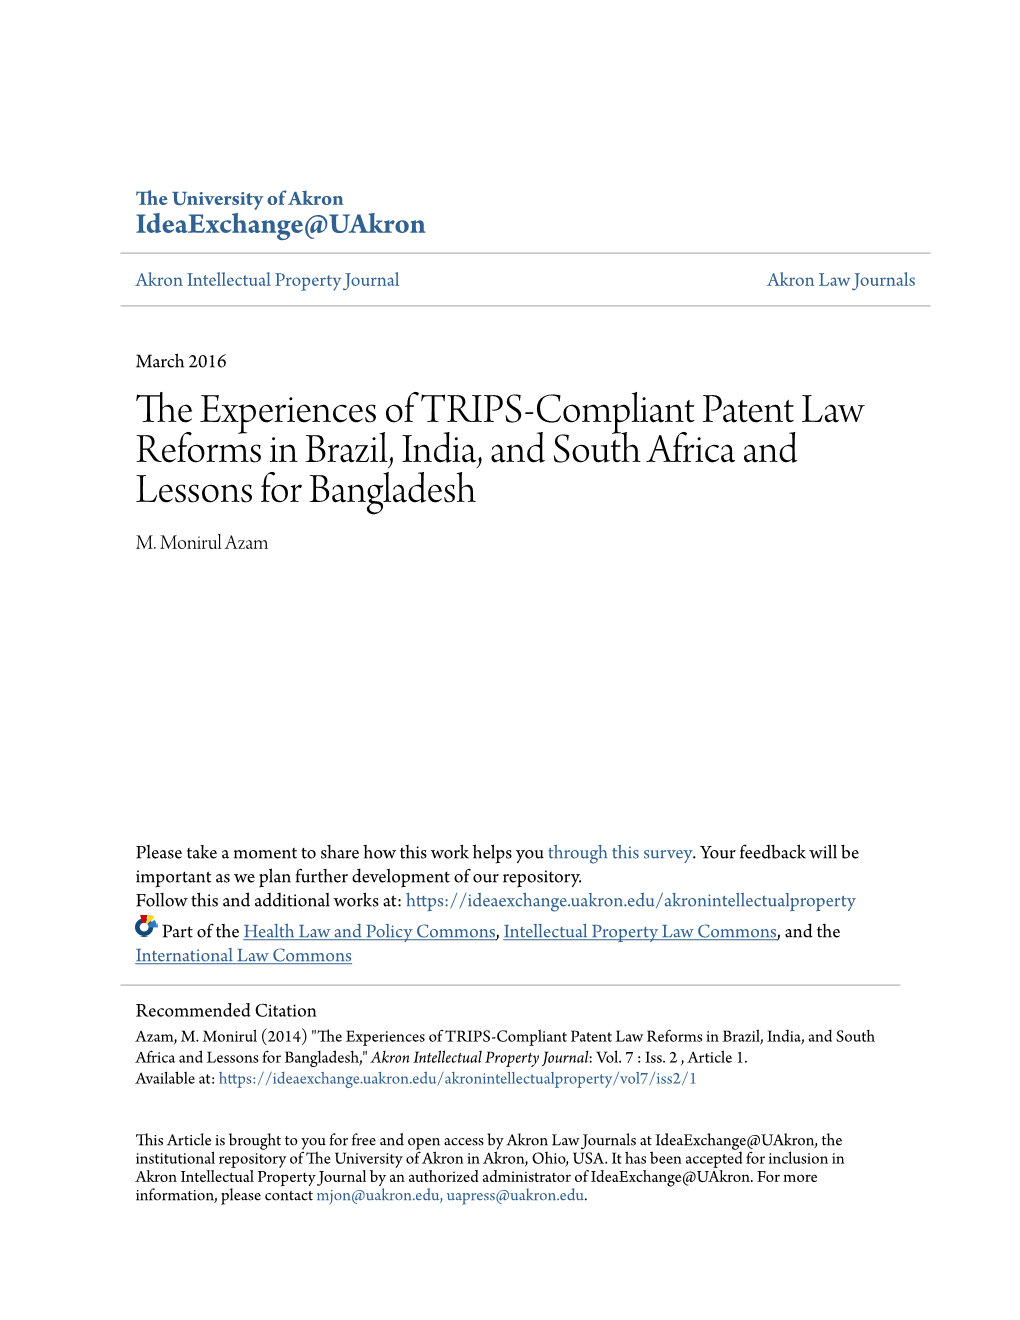 The Experiences of TRIPS-Compliant Patent Law Reforms in Brazil, India, and South Africa and Lessons for Bangladesh M